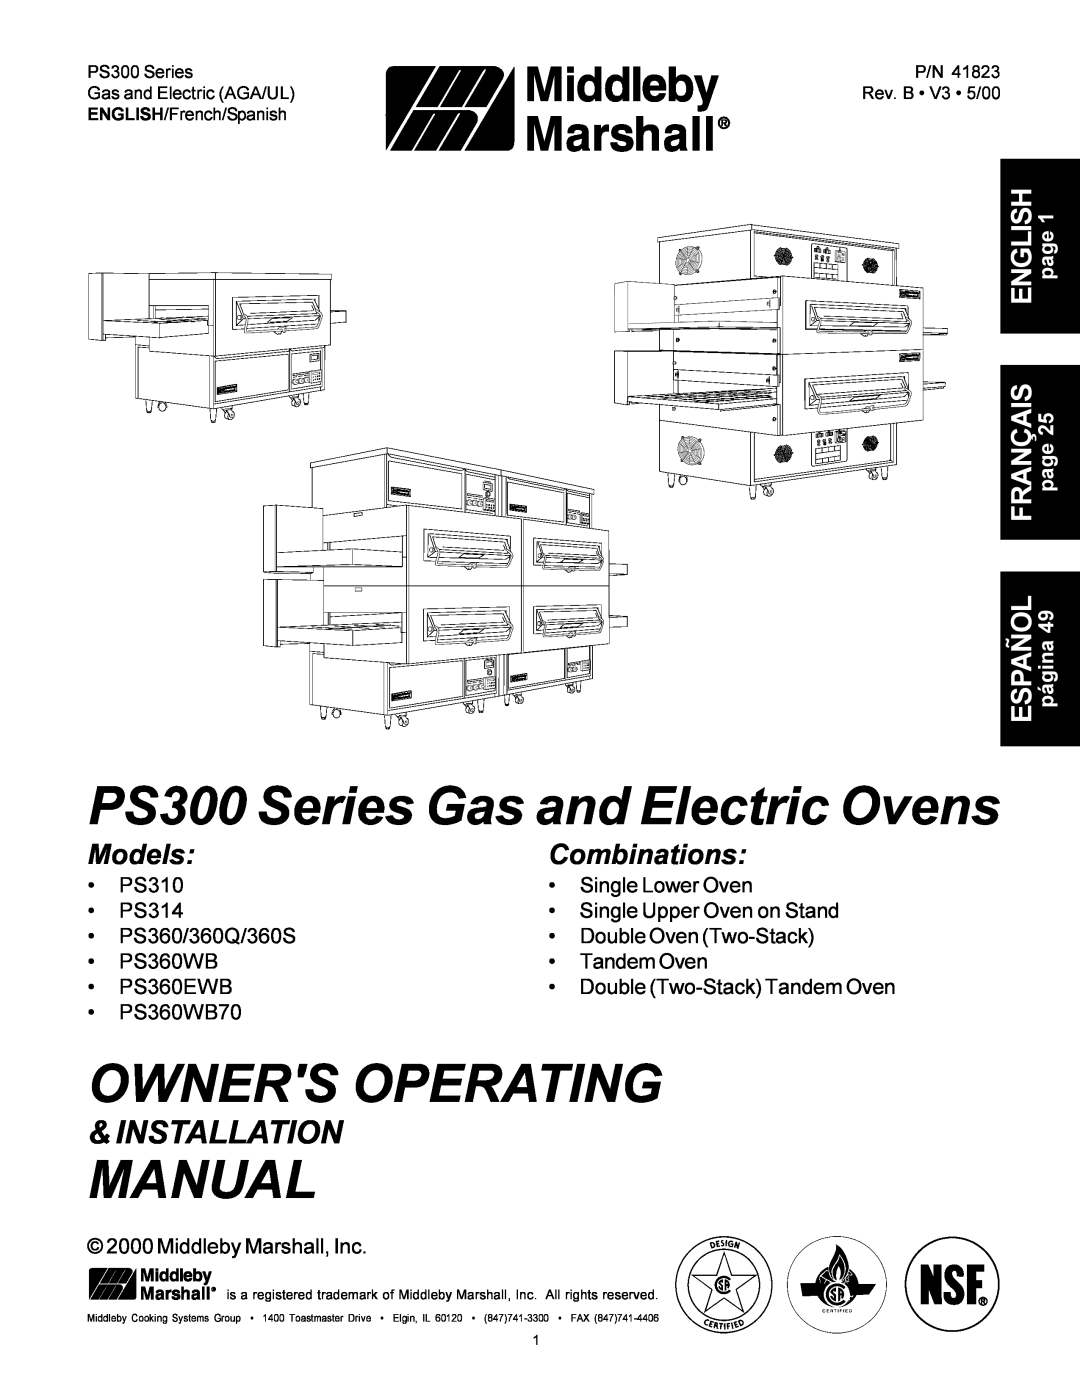 Middleby Marshall PS360 installation manual PS300 Series Gas and Electric Ovens, Owners Operating, Manual, Installation 